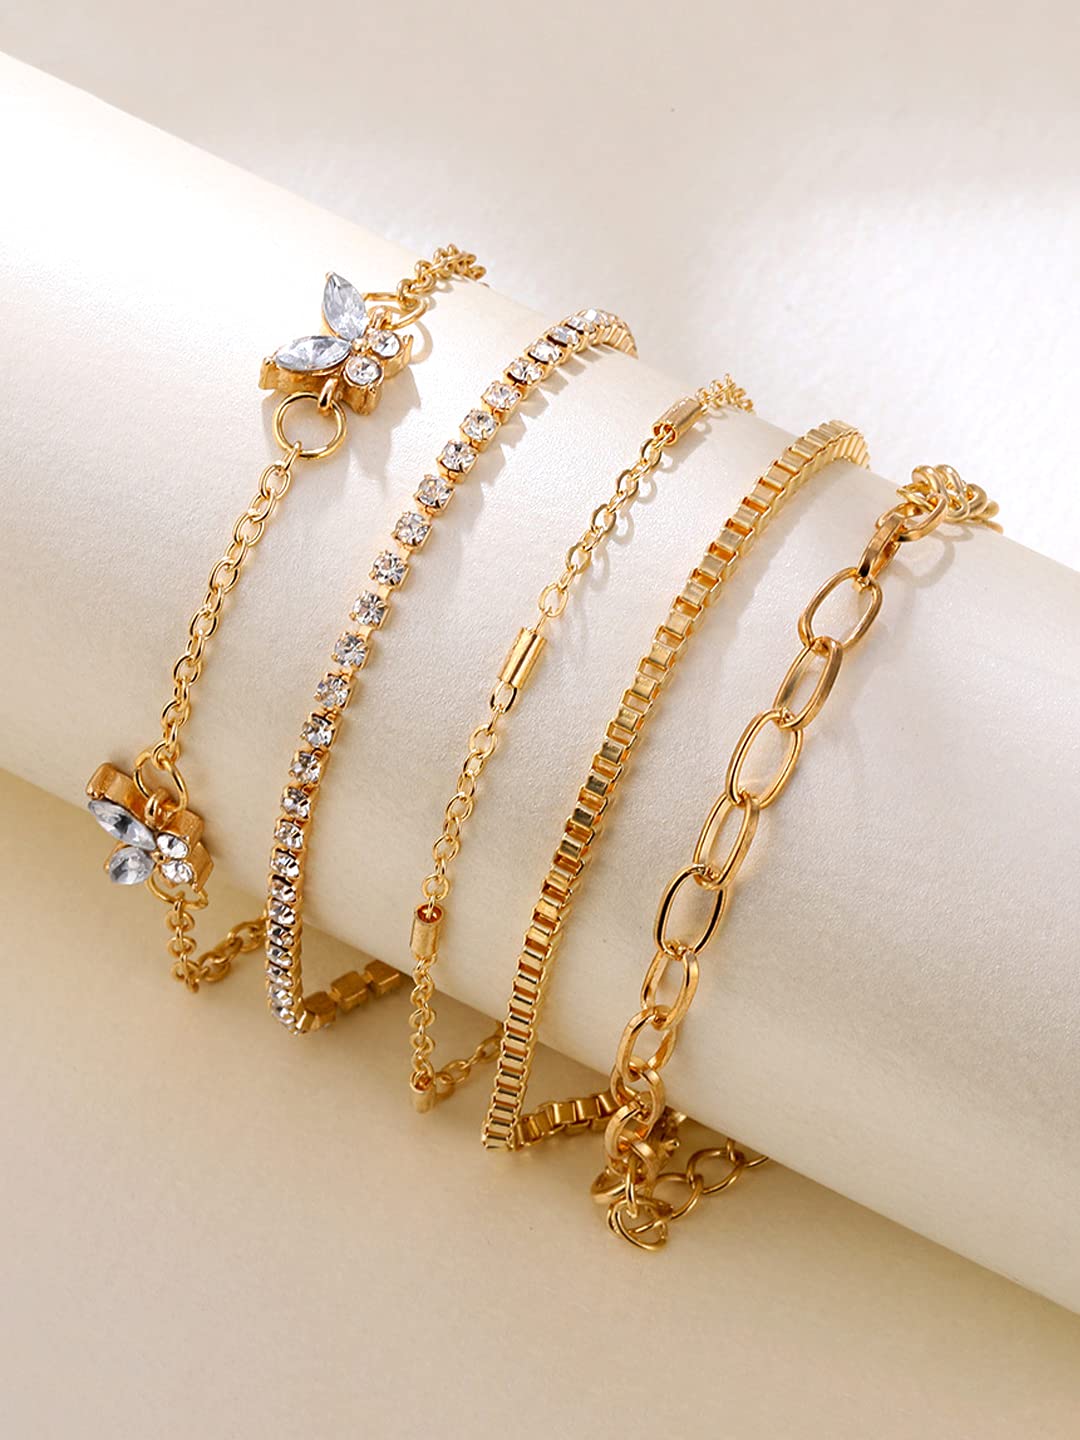 24K Plated Yellow Gold Flower 24k Gold Charm Bracelet With Heart Charms For  Women And Girls Trendy Fashion Jewelry From Jewelshops, $2.03 | DHgate.Com